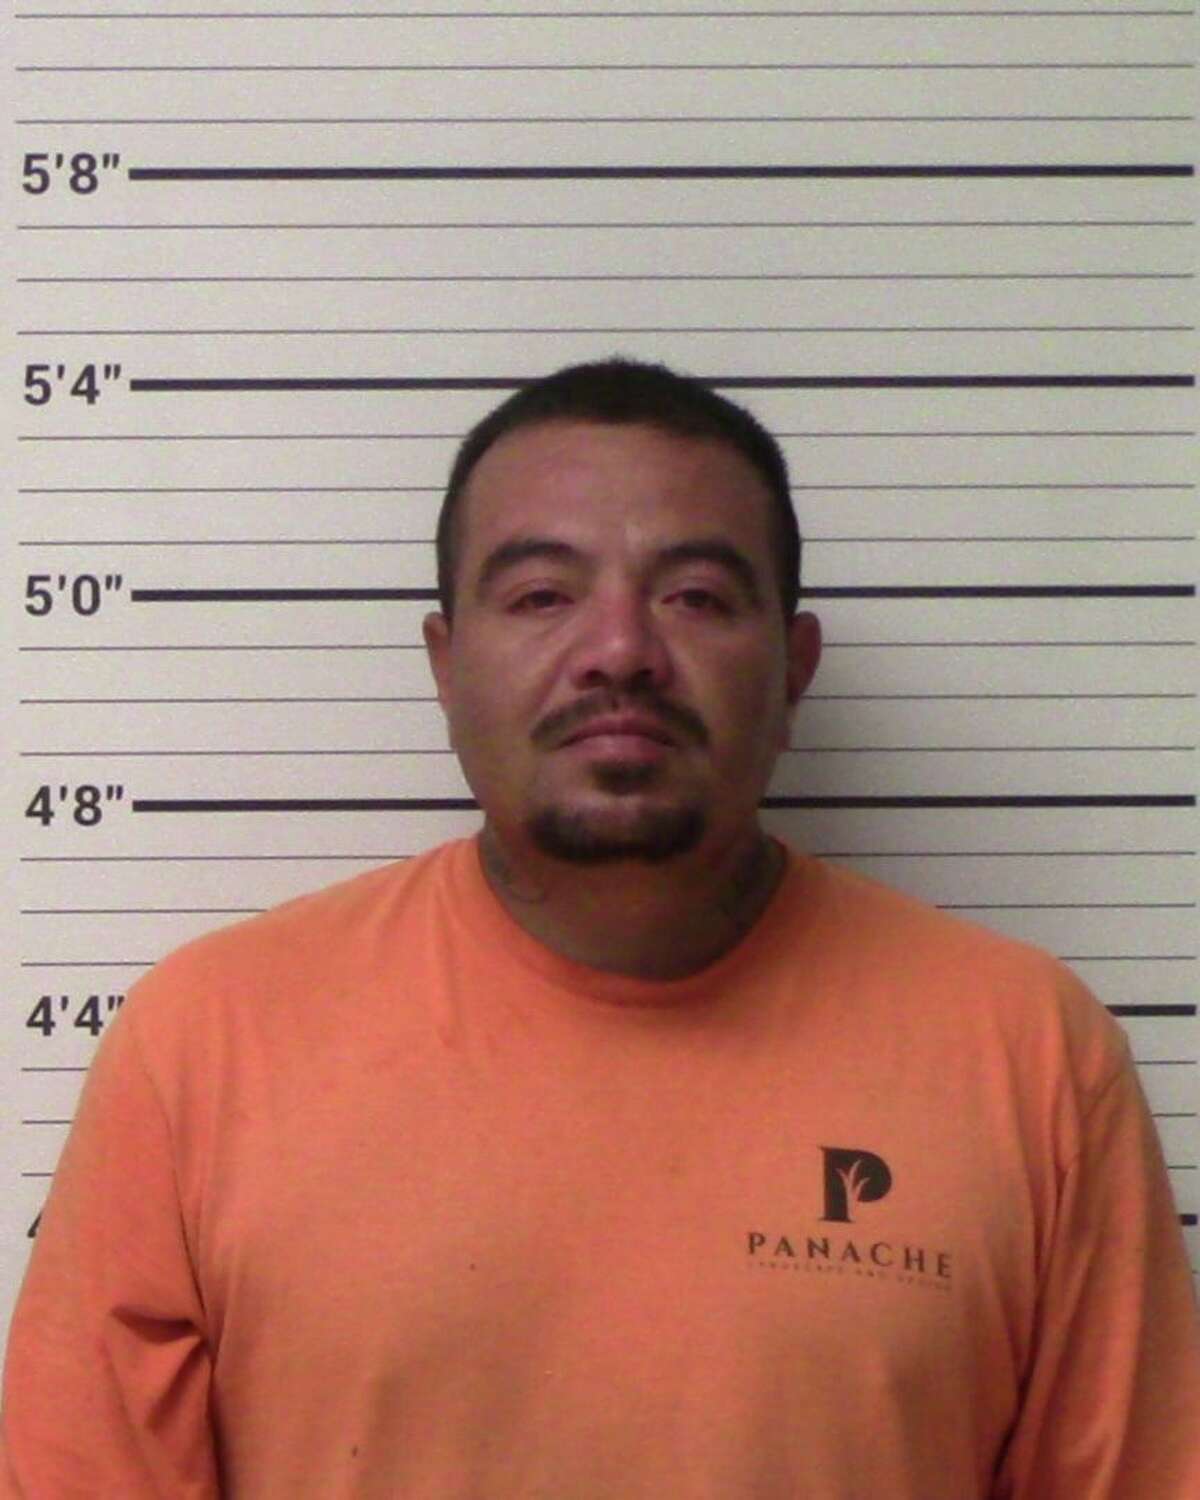 Octavio Rico Viramontes, 38, was arrested during a prostitution sting by the Kerr County Sheriff's Office.